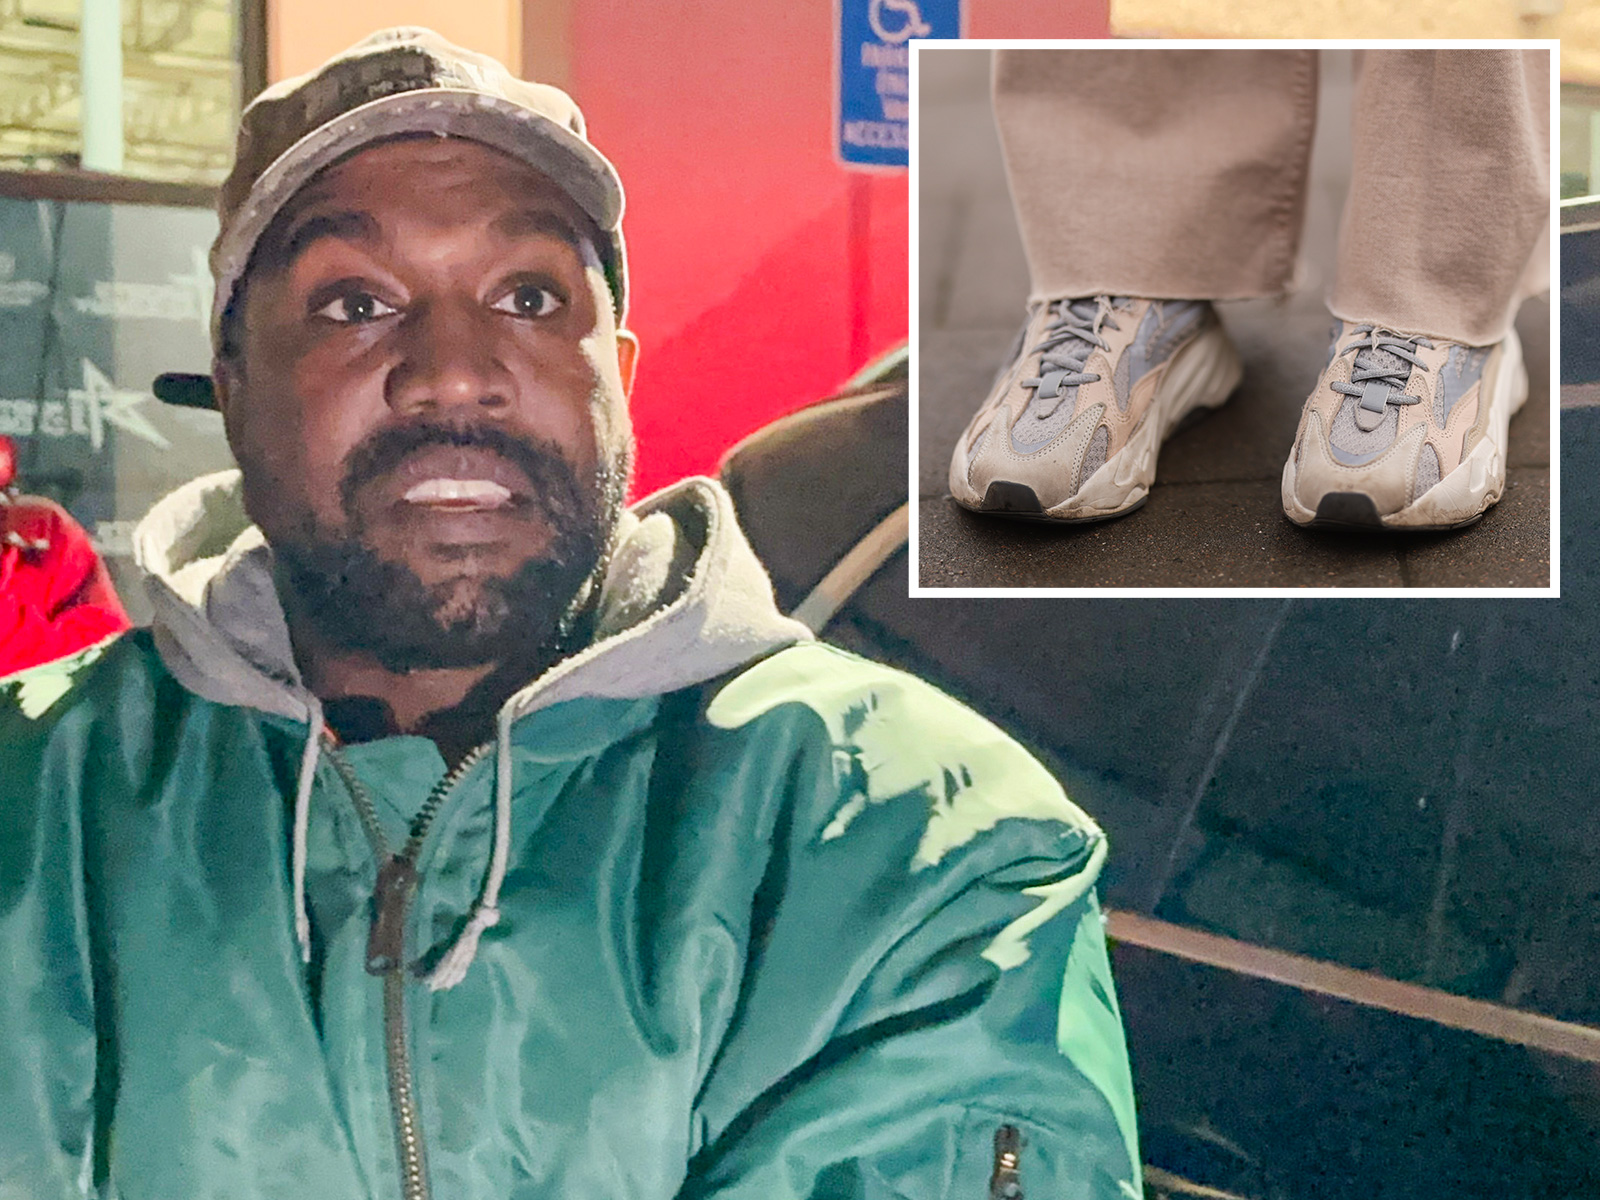 Kanye West's New Shoes Not Too Sole-ful